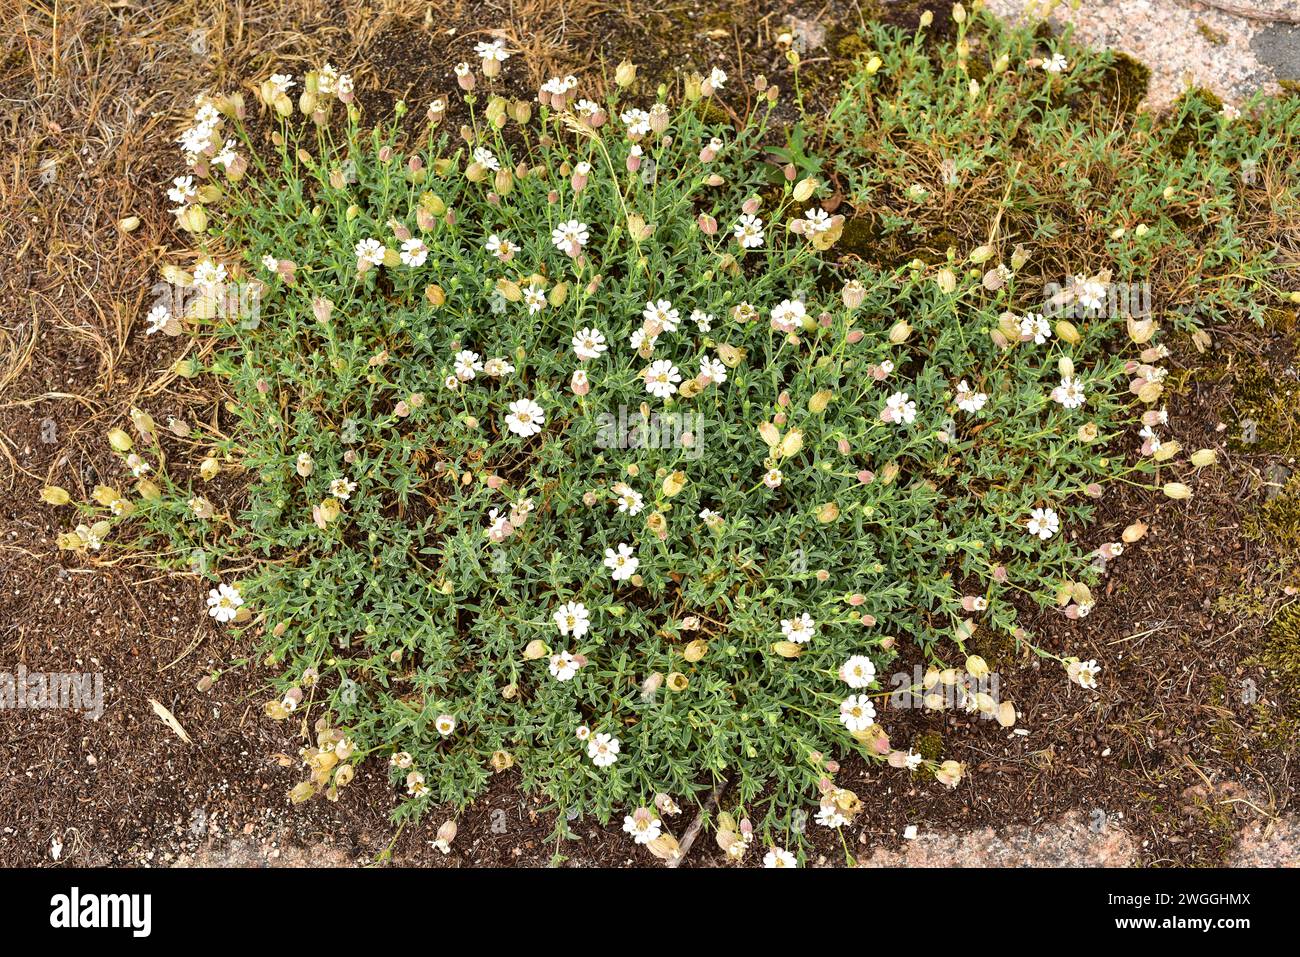 Sea campion (Silene uniflora or Silene maritima) is a prostrate perennial herb native to Atlantic and Baltic coasts. This photo was taken in Bohuslan, Stock Photo